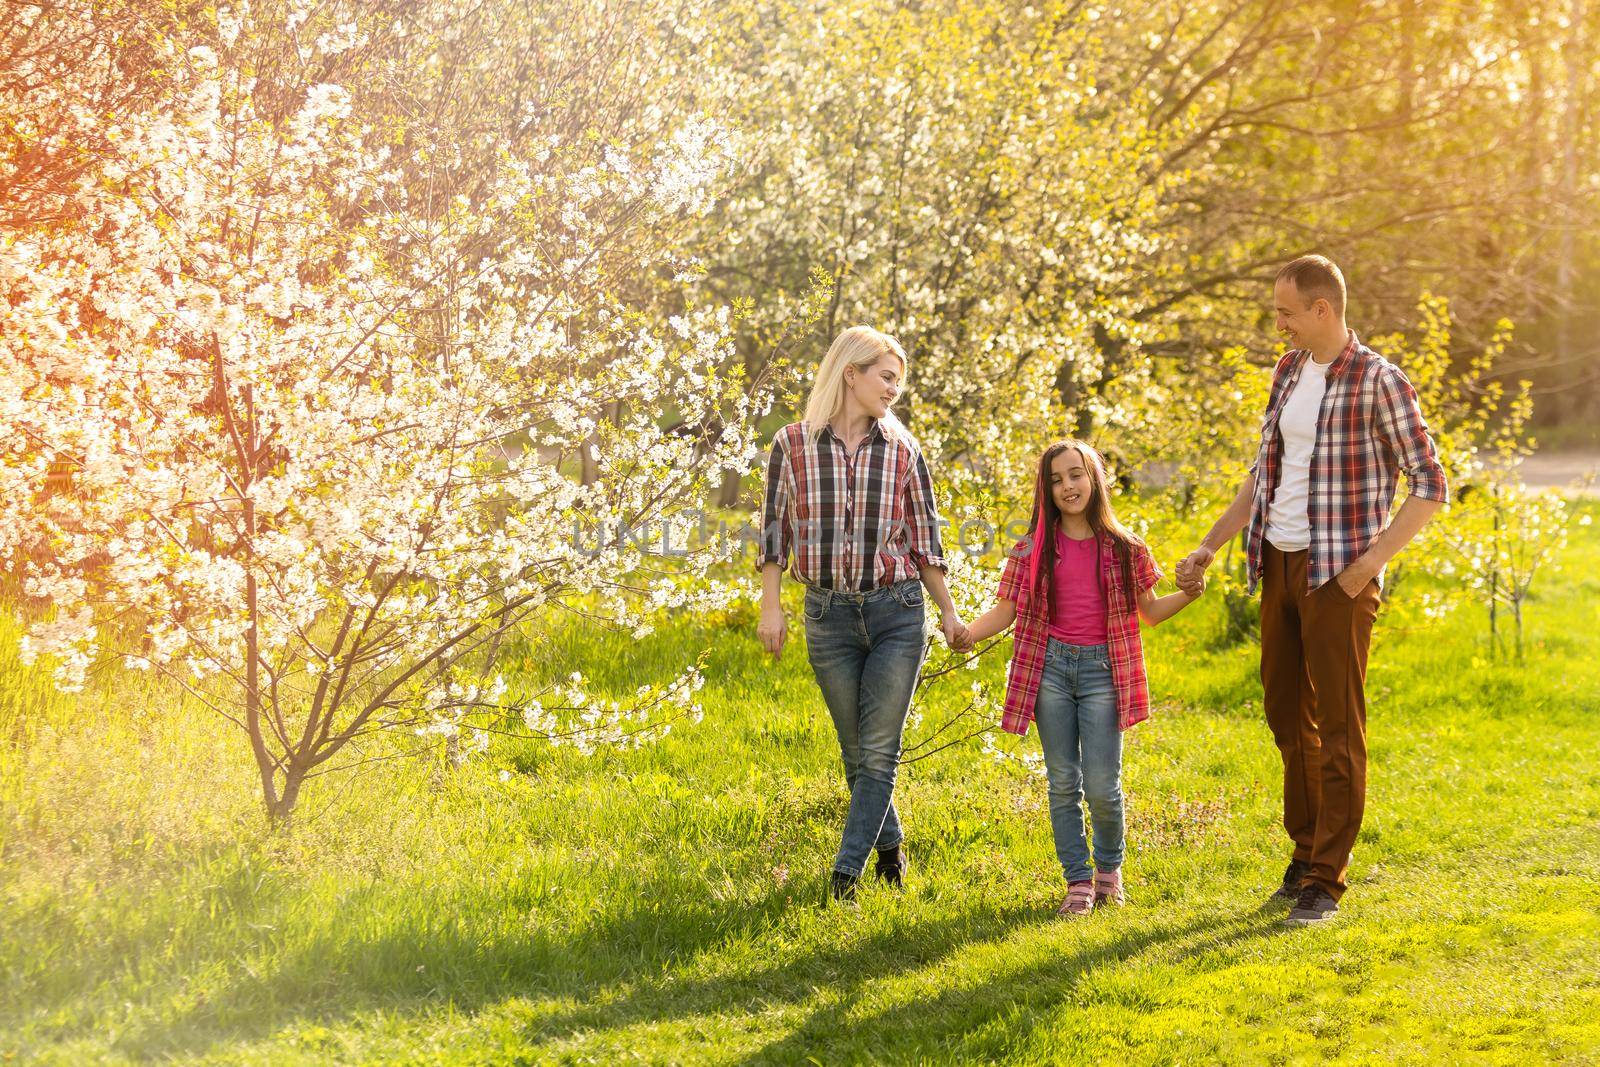 Outdoor portrait of happy young family playing in spring park under blooming tree, lovely couple with little child having fun in sunny garden by Andelov13